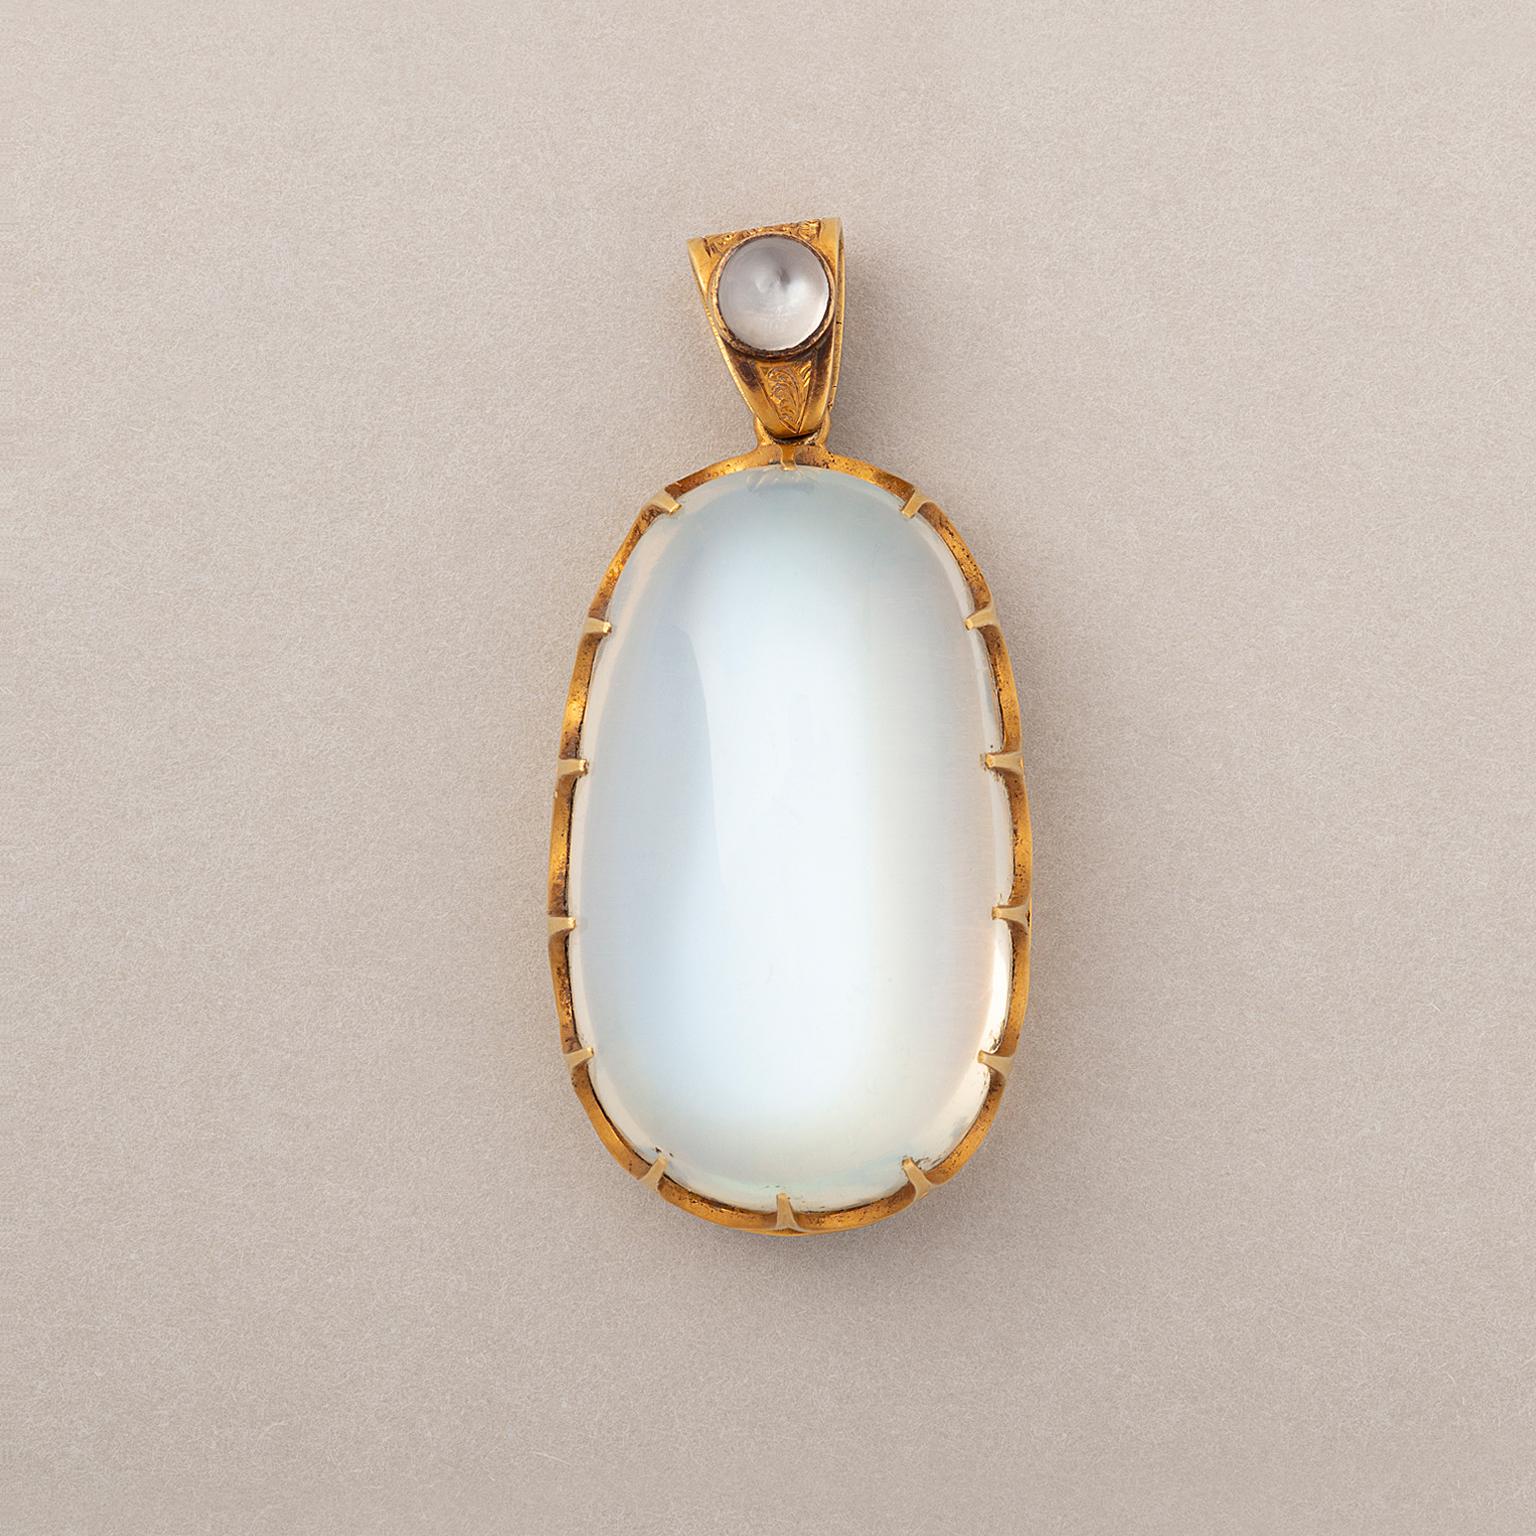 An 18 carat gold pendant set with a large, oval-pear, cabochon cut moonstone open set in fourteen elegant claws, most likely English in origin, circa 1890.

weight: 16.13 grams
dimensions: 40 x 19 mm